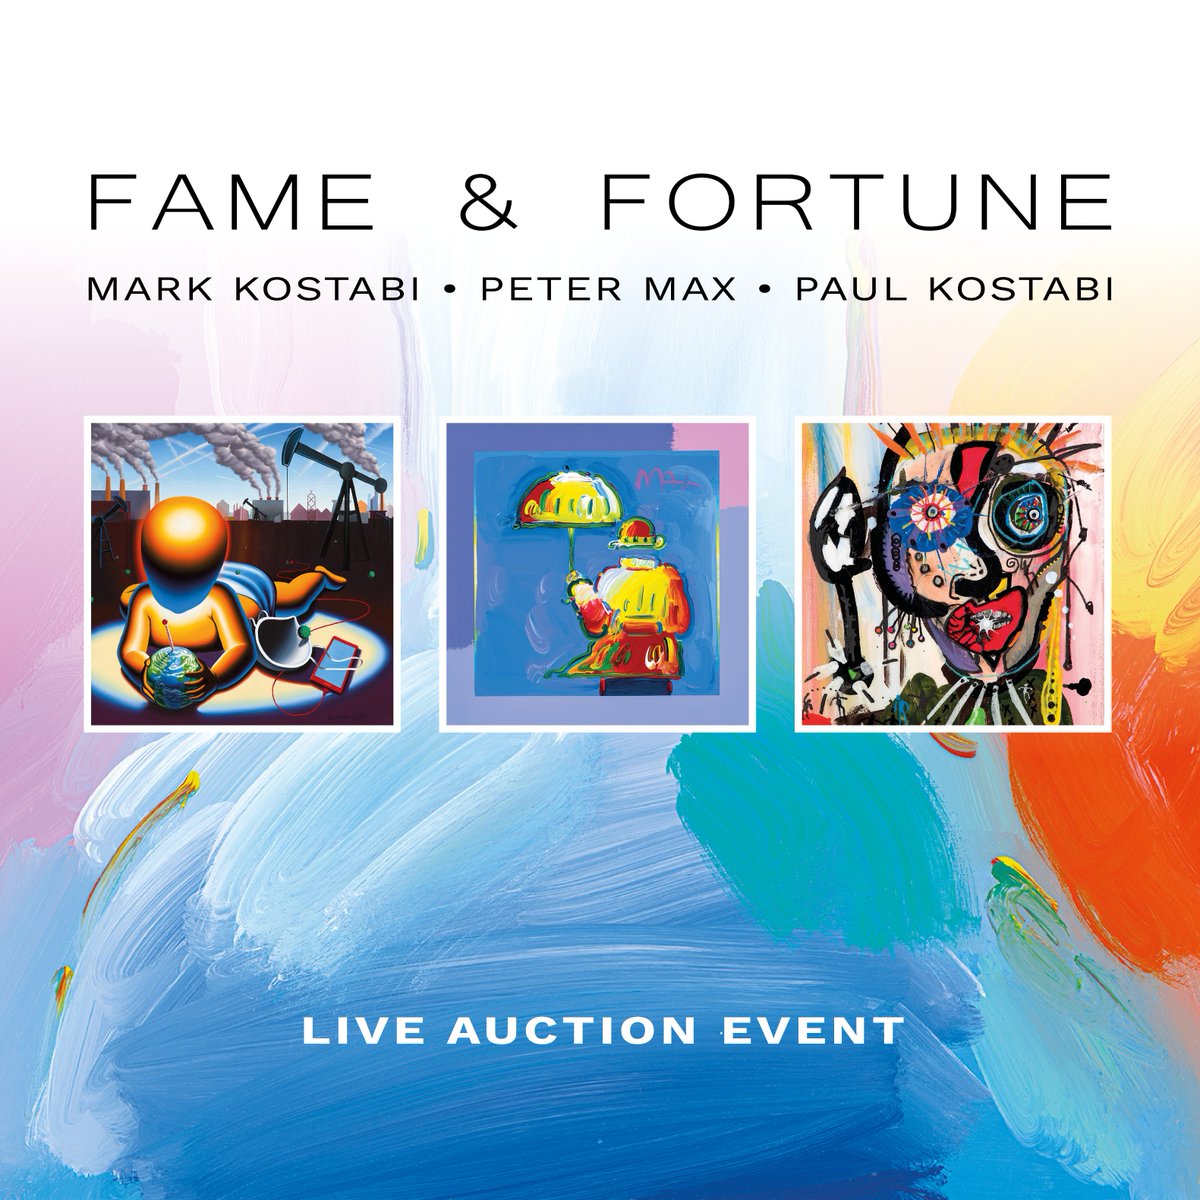 🎨 Join us at Park West Gallery SoHo for Fame & Fortune! 📅 Date: May 9th ⏰ Time: 5-8pm (Doors open at 4:30pm) 📍 Location: 411 W Broadway, NY, NY 10012 RSVP: soho@parkwestgallery.com #ParkWestGallery #FameandFortune #MarkKostabi #PaulKostabi #PeterMax